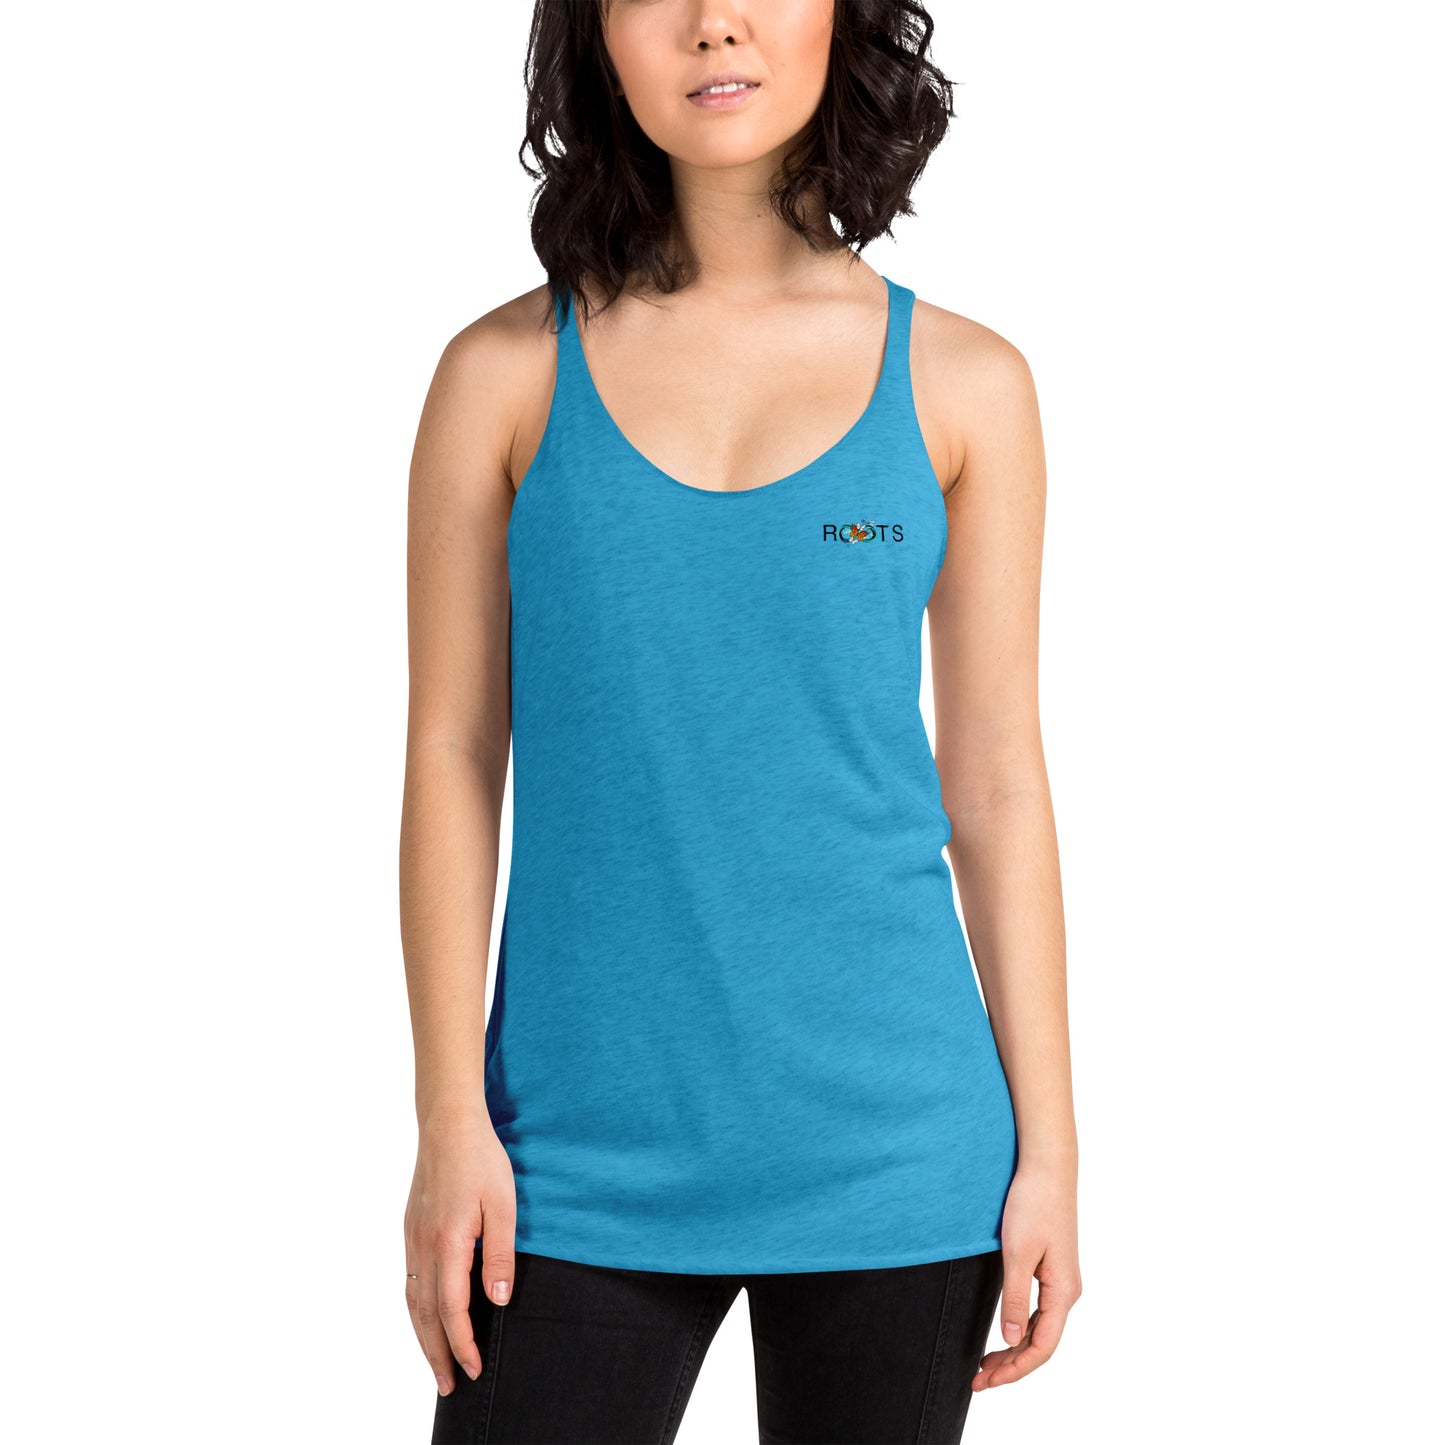 Roots Are Forever Women's Racerback Tank